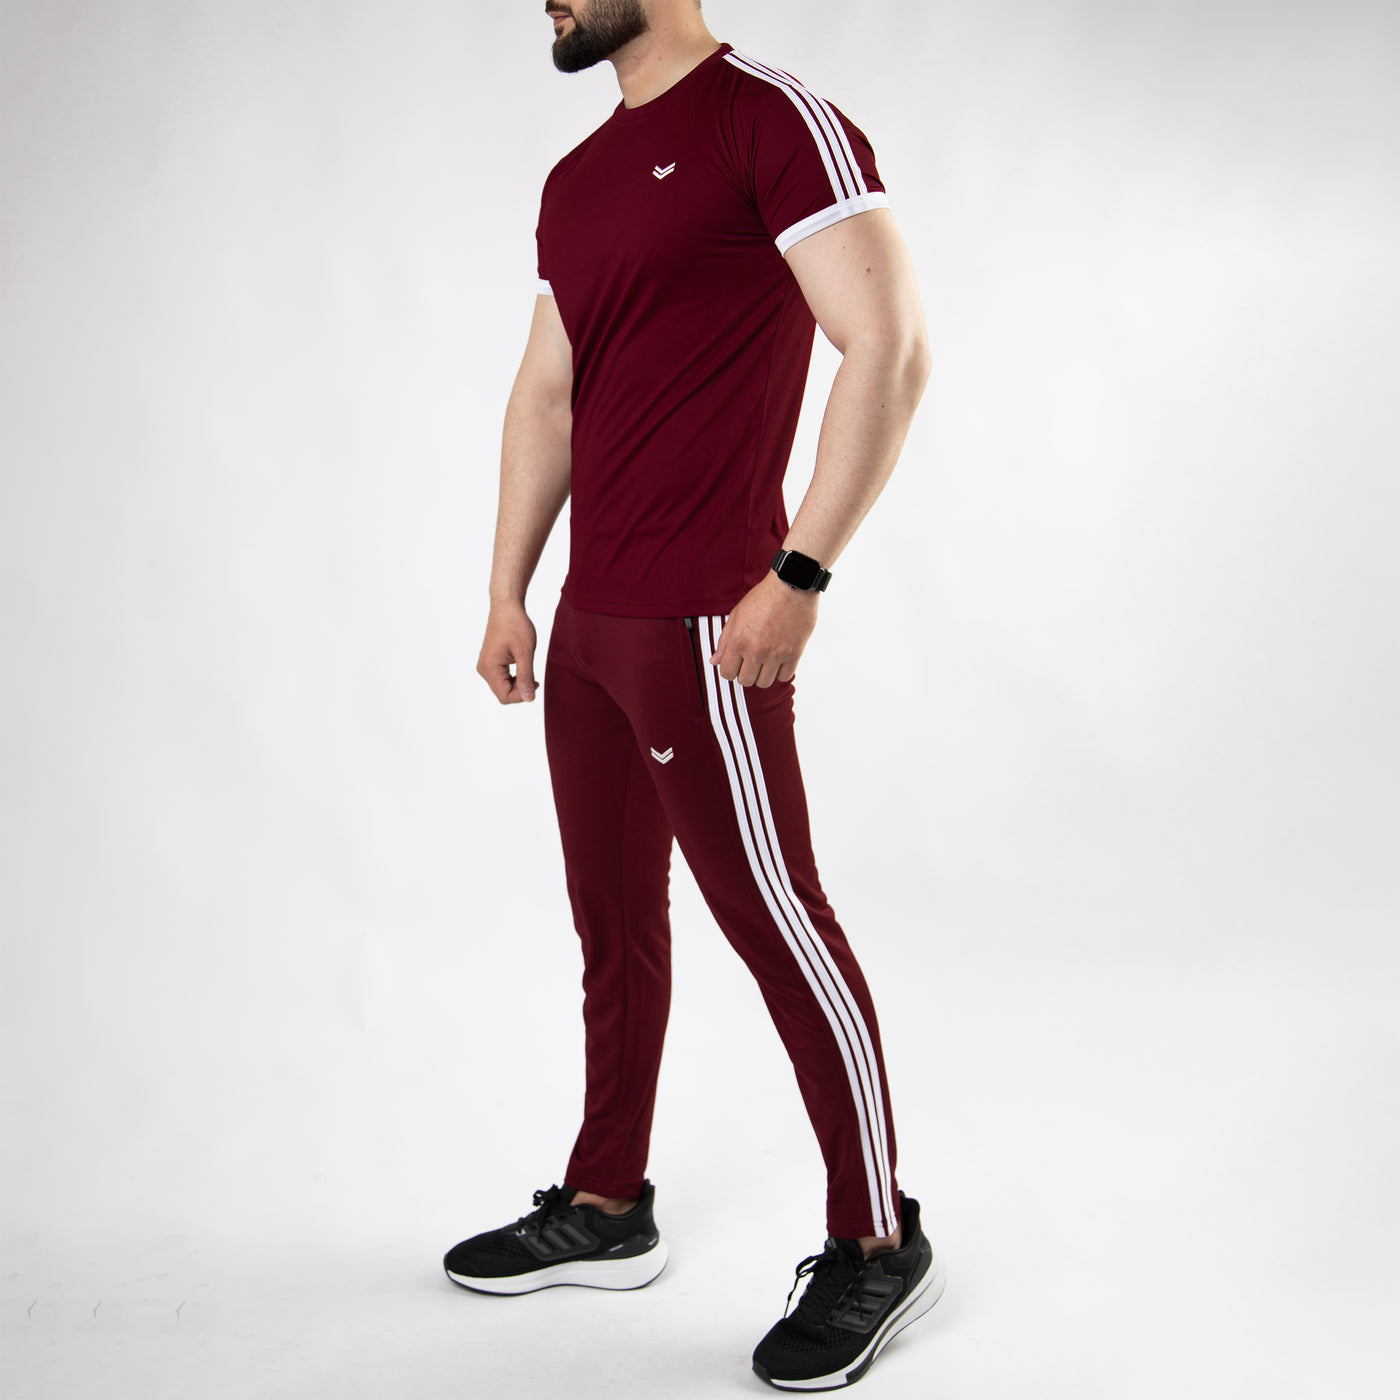 Maroon Ringer Twinset with Three White Stripes